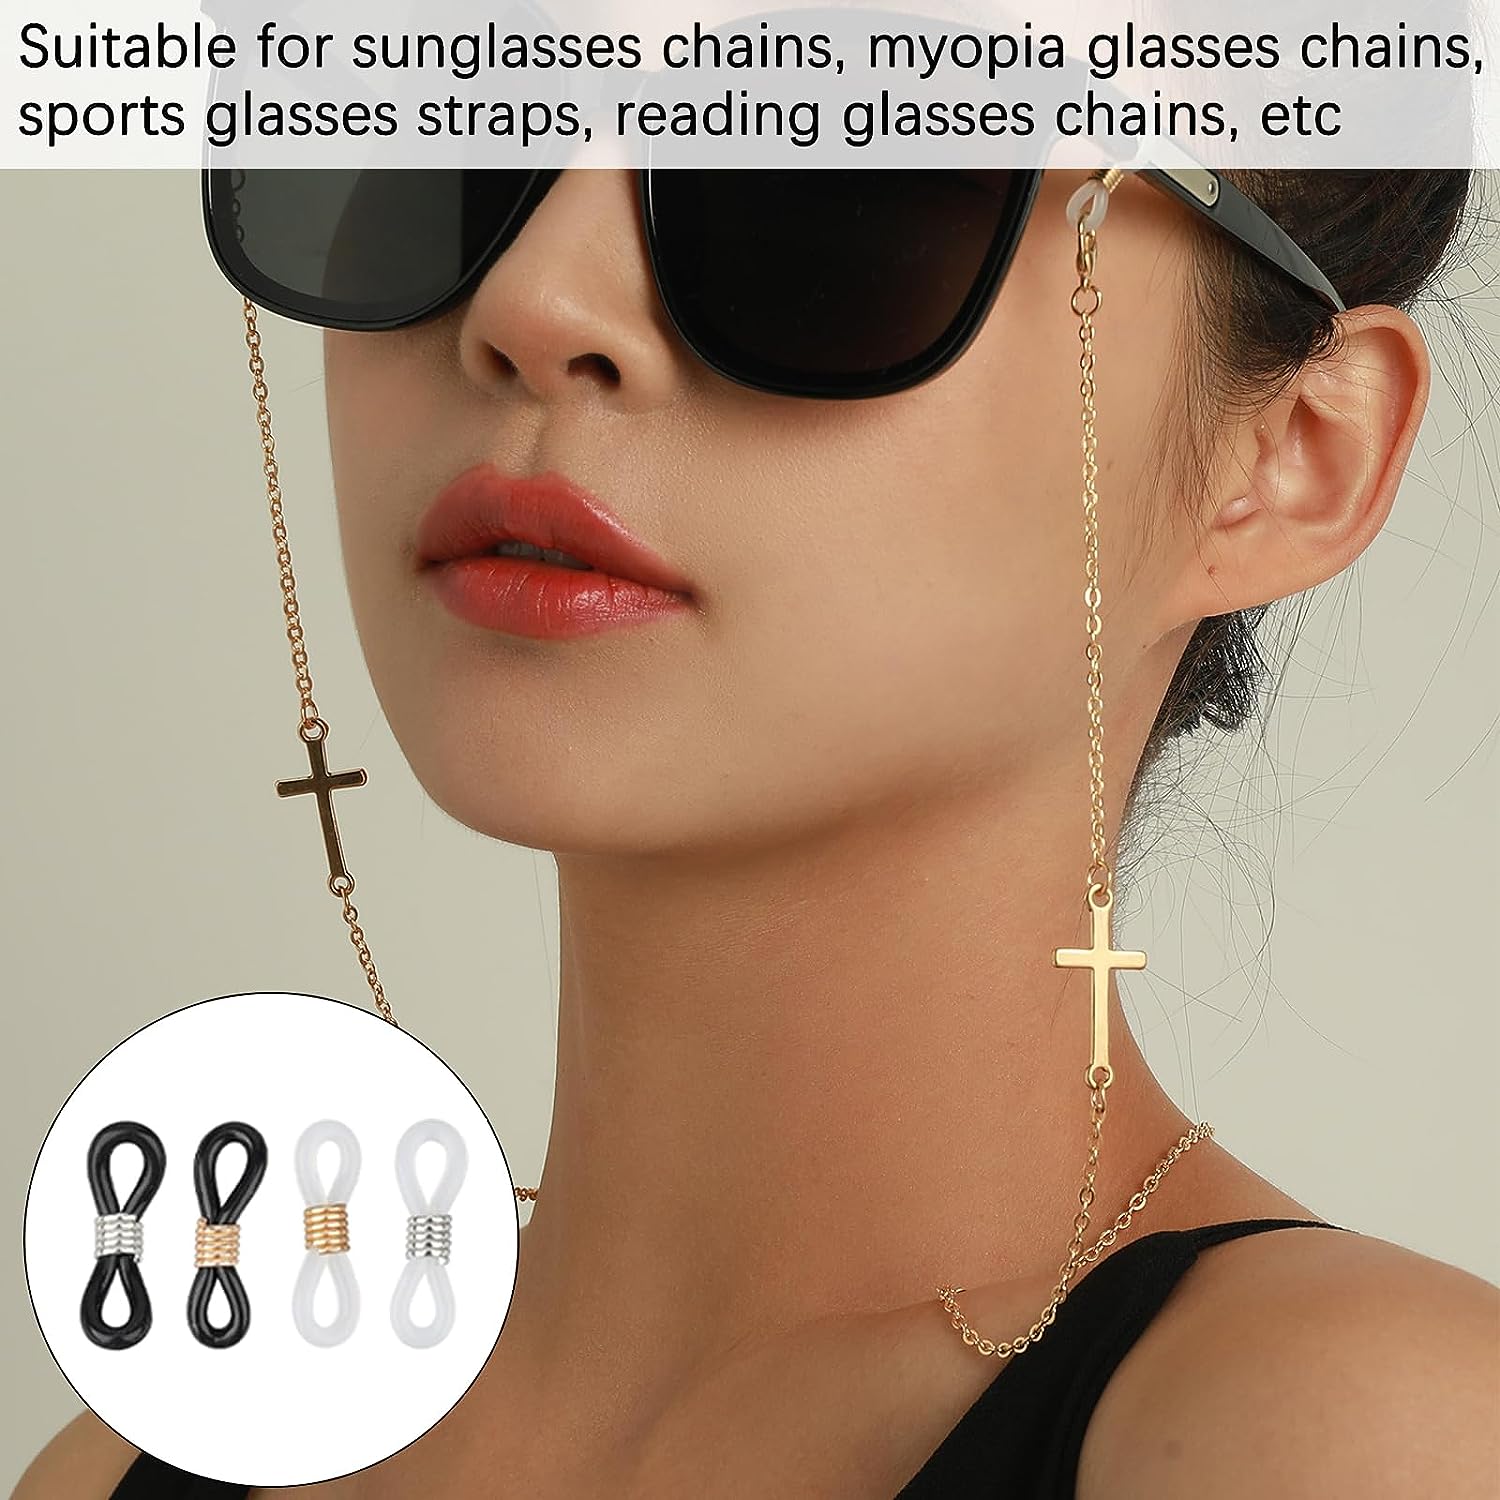 Eyeglass Chain Ends, Glasses Chain Connector 20Pcs Adjustable Eyeglass  Chains Ends Silicone Eyeglass Connector Eyeglass Chain Loop Holder Glasses